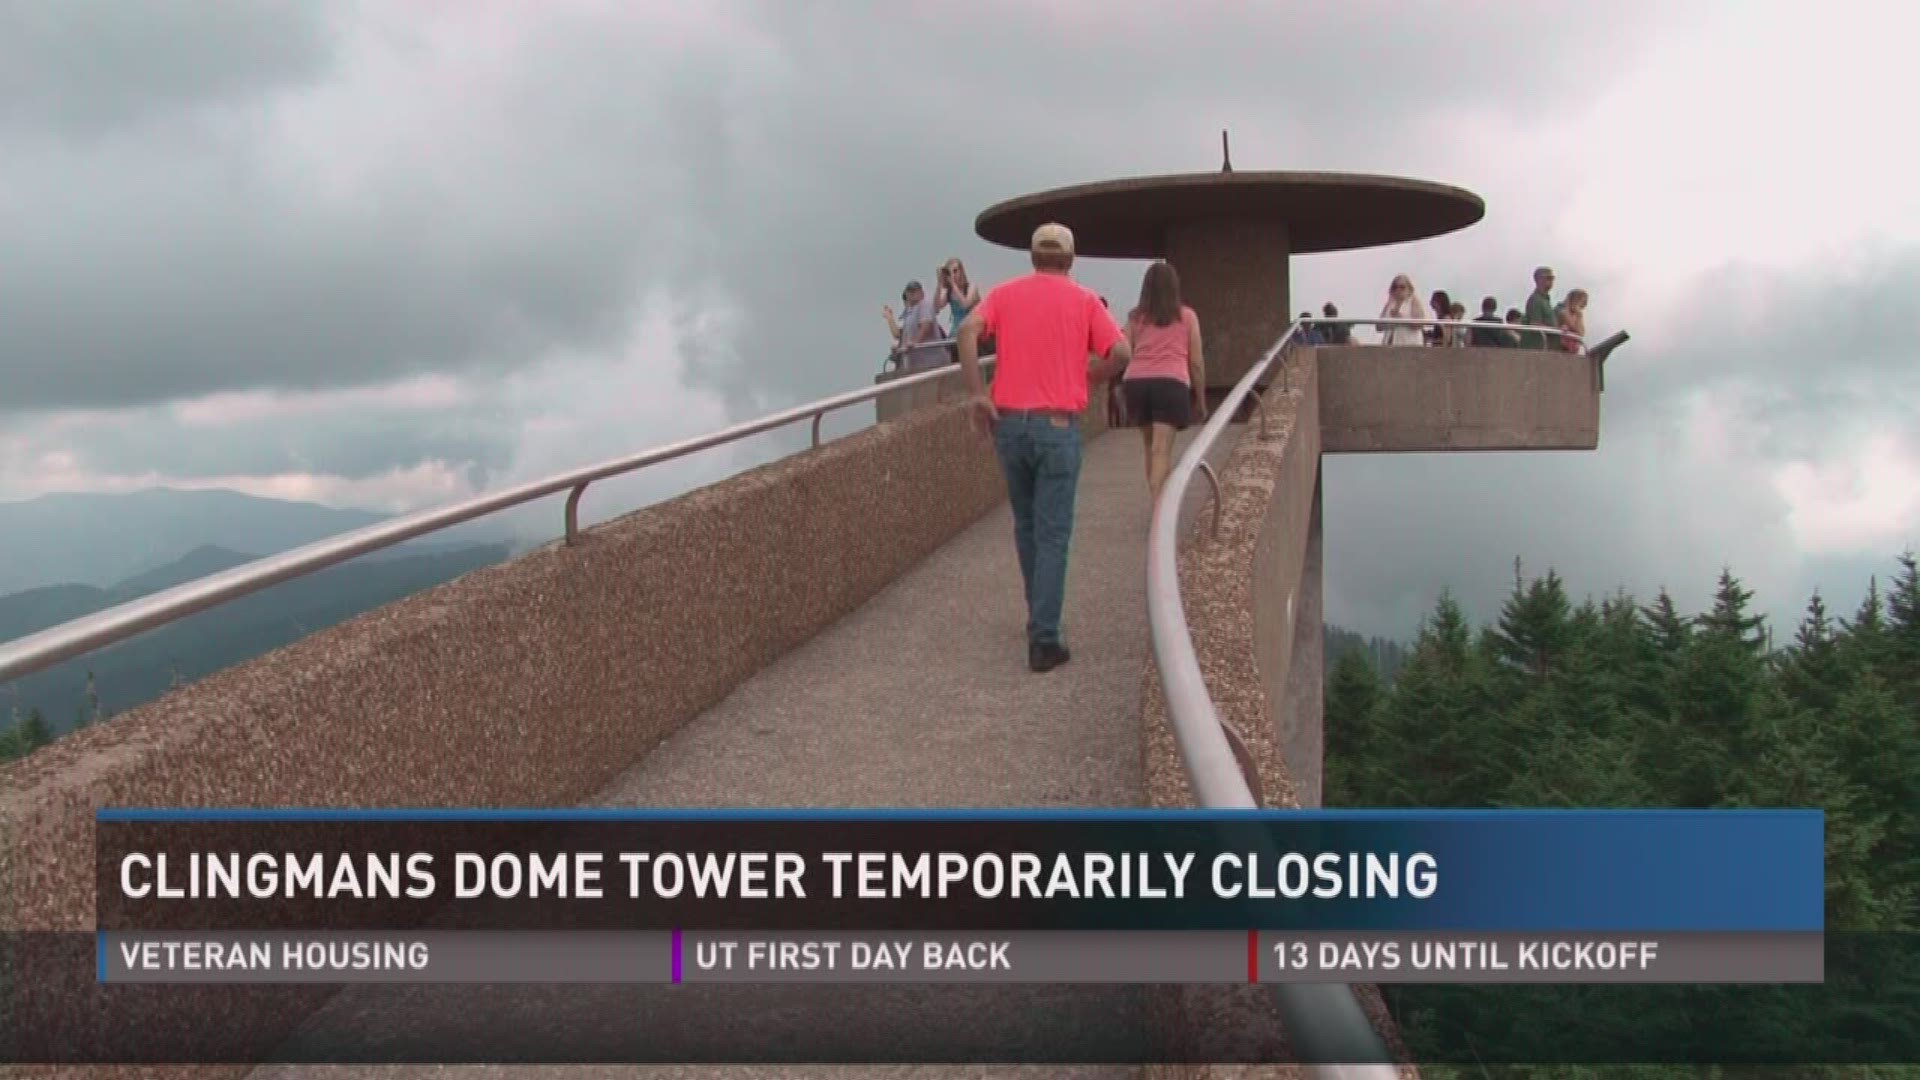 Aug. 22, 2017: The Clingmans Dome observation tower will temporarily closed for the rest of the 2017 season for repair work.